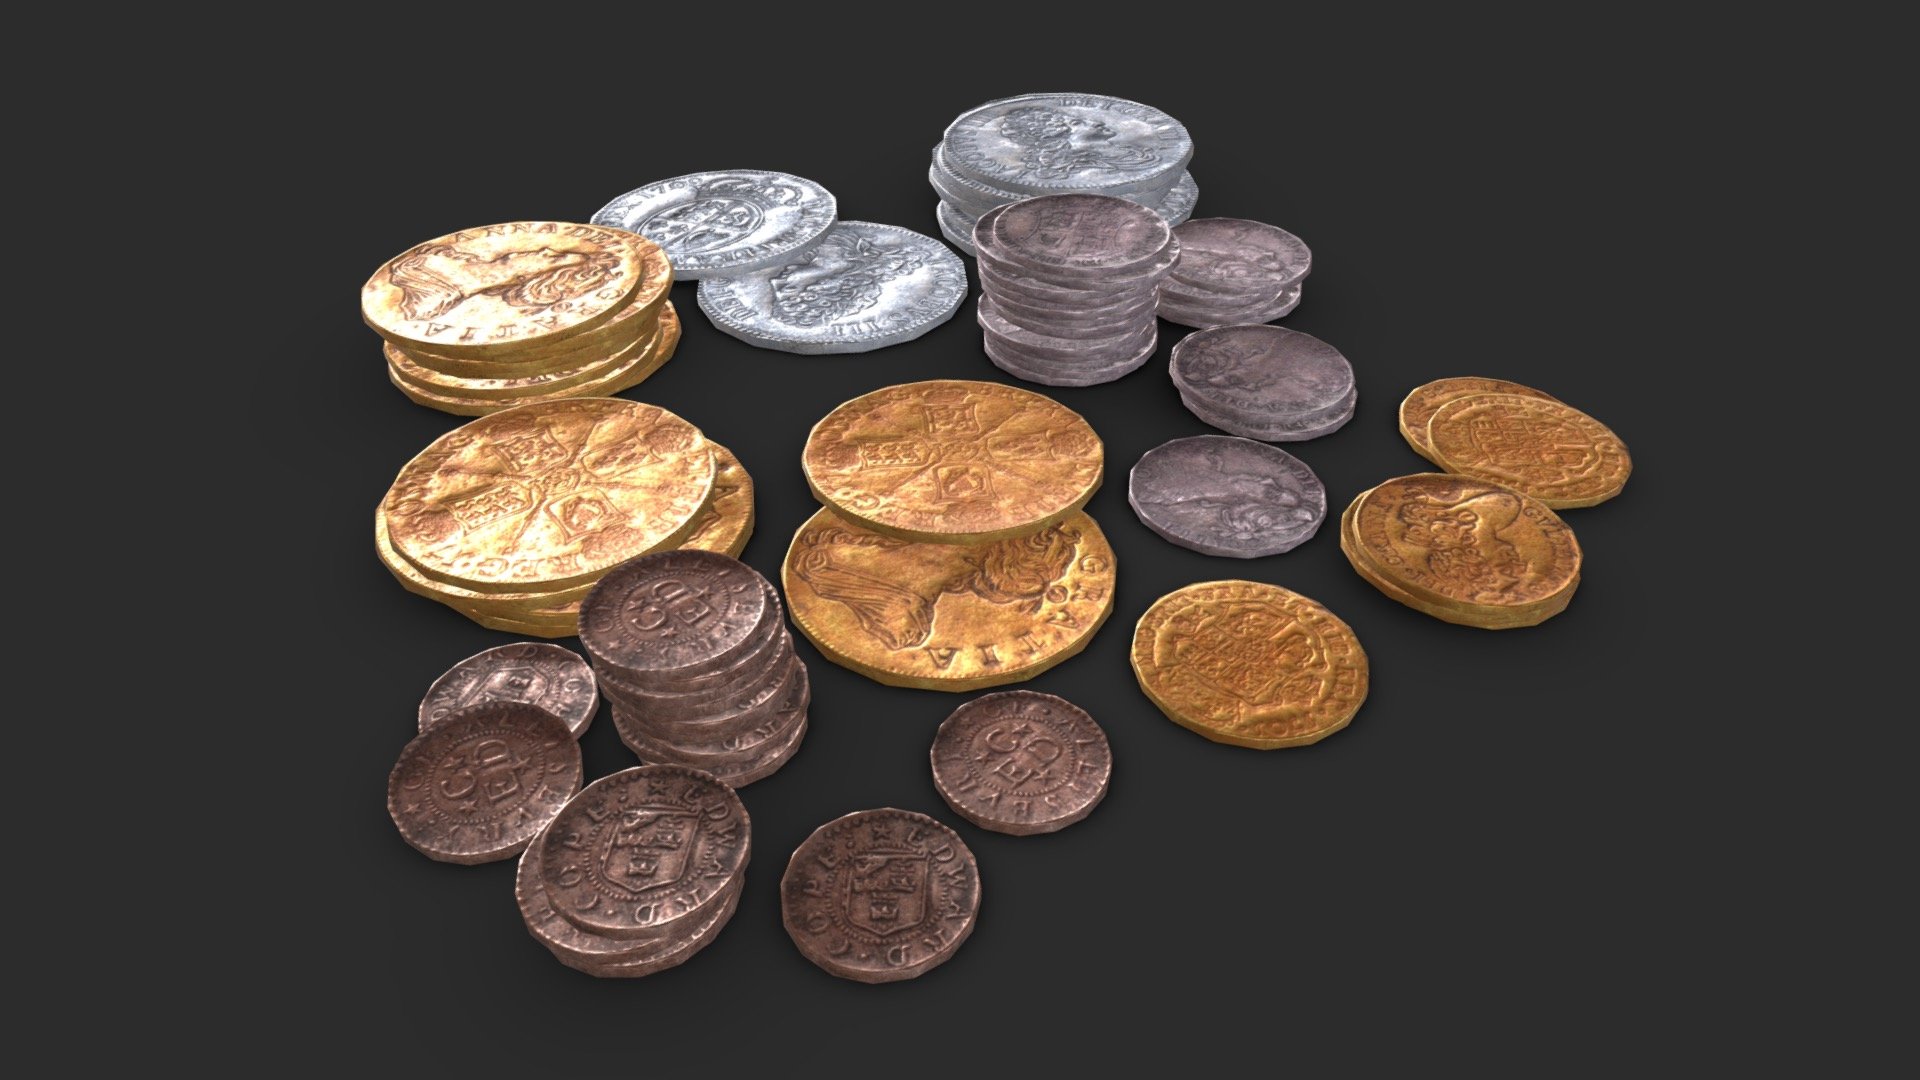 This old British Empire coins set includes 5 individual coins and 6 prefabs. The coins are real historical 3D models of crowns, pistoles, guineas and shillings from the old British Empire used during the 16th Century. This set also includes a Substance Painter Metal SmartMaterial created to texture coins

The assets are available in realistic style and can be used in any game (historical, first person shooter, GTA like… )
All objects share a unique material for the best optimization for games

Those AAA game assets of historical money gold coins will embellish you scene and add more details which can help the gameplay and the game-design.

All textures are PBR ready and available in 2K

Low-poly model &amp; Blender native 3.1

SPECIFICATIONS




Objects : 11

Polygons : 7056 (48 by coin)

TEXTURES




Materials in scene : 1

Textures sizes : 2K

Textures types : Base Color, Metallic, Roughness, Normal (DirectX &amp; OpenGL), Heigh &amp; AO (also Unity &amp; Unreal ARM workflow maps)

Textures format : PNG
 - Old British Coins - Buy Royalty Free 3D model by KangaroOz 3D (@KangaroOz-3D) 3d model